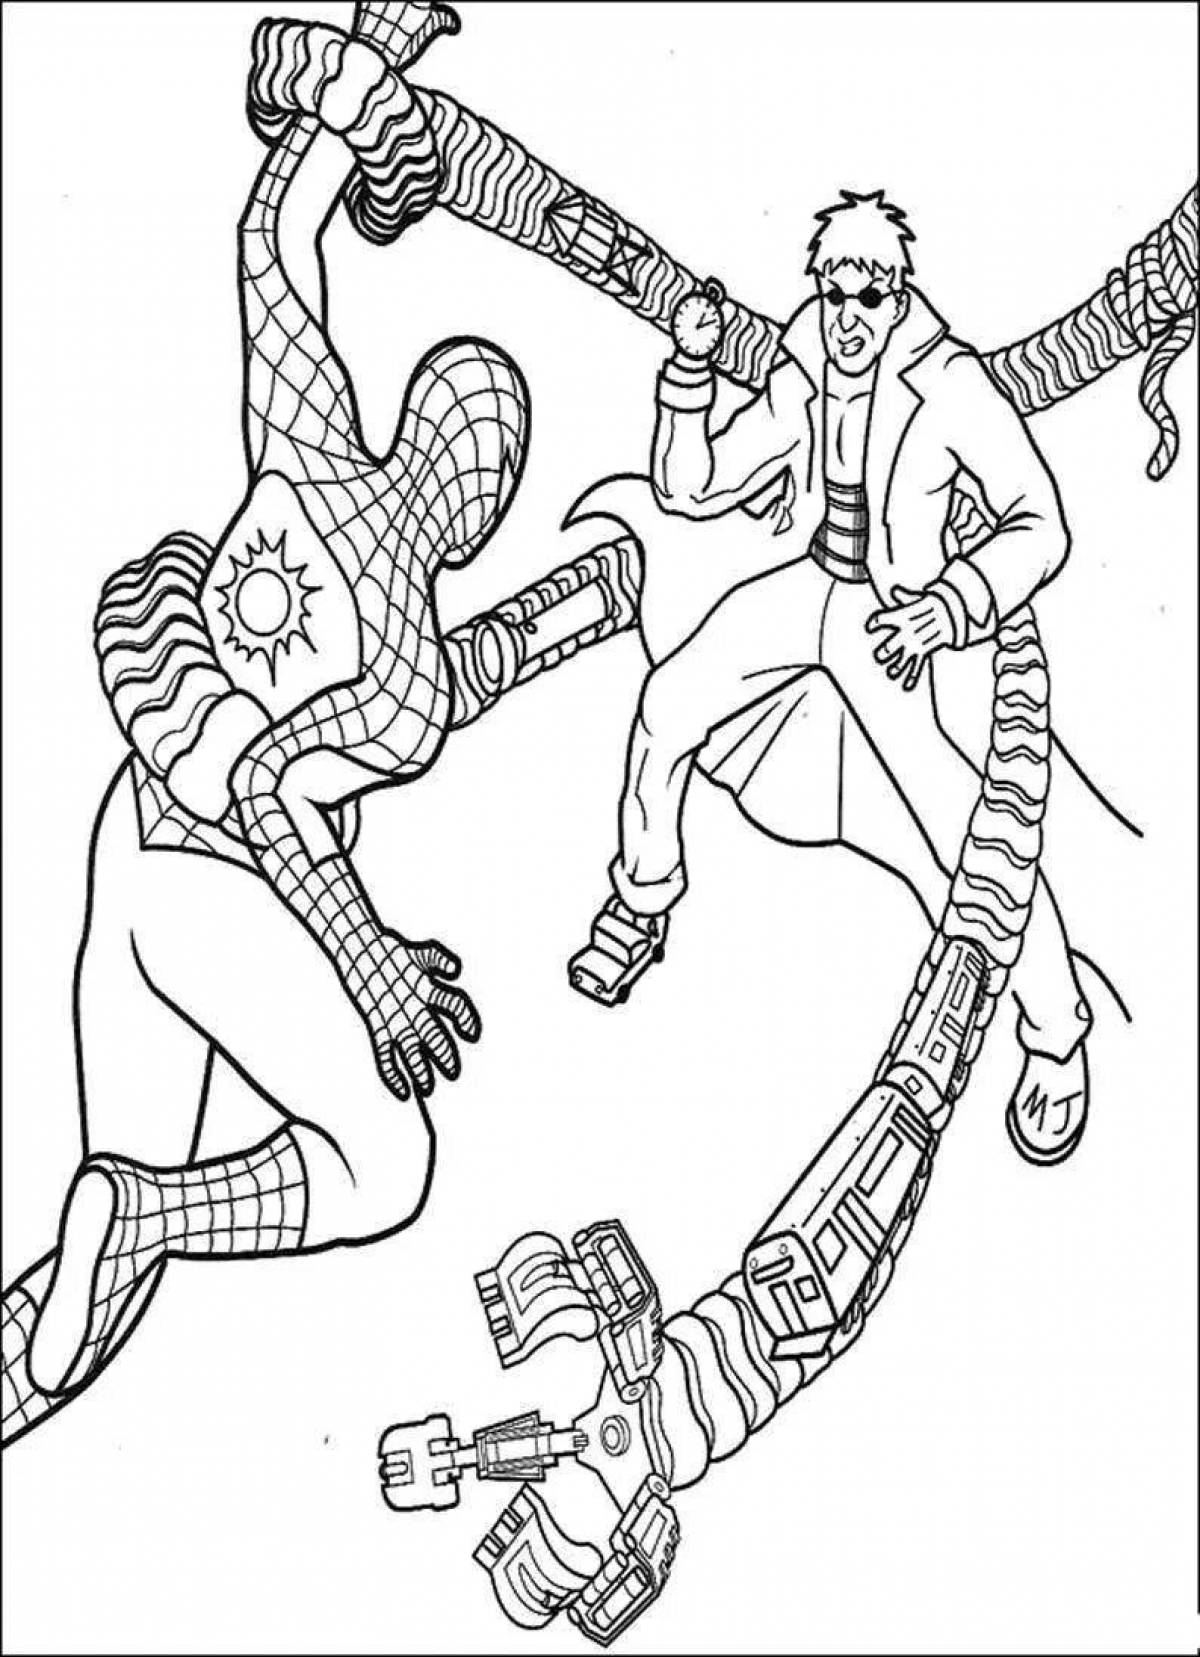 Coloring book charming doctor octavius